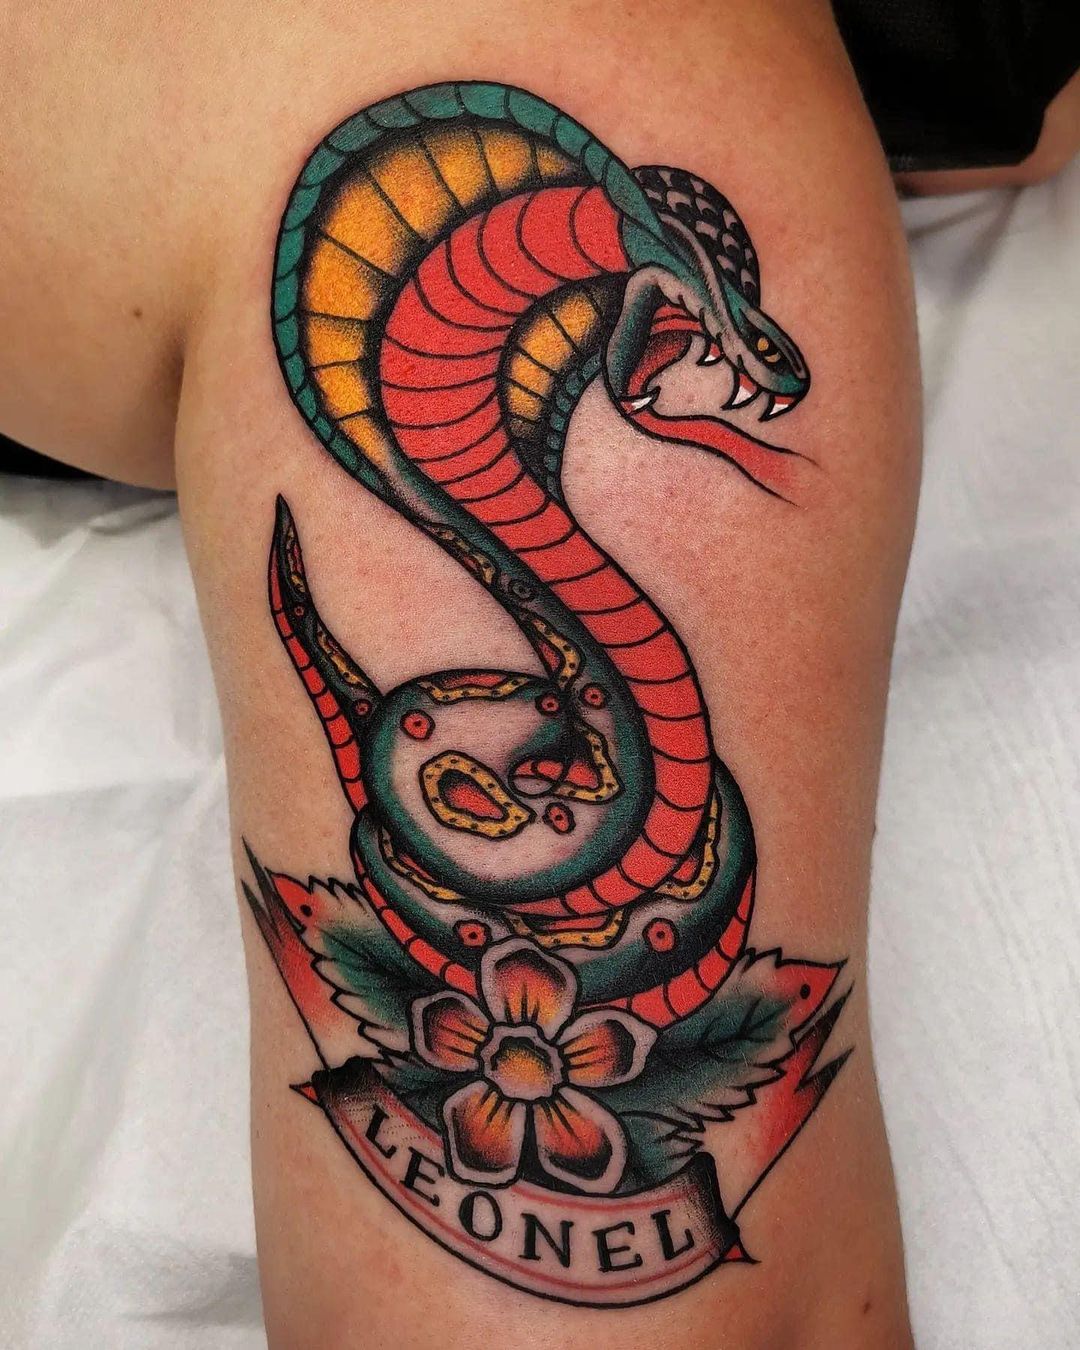 Tattoo of a snake located on the shoulder blade